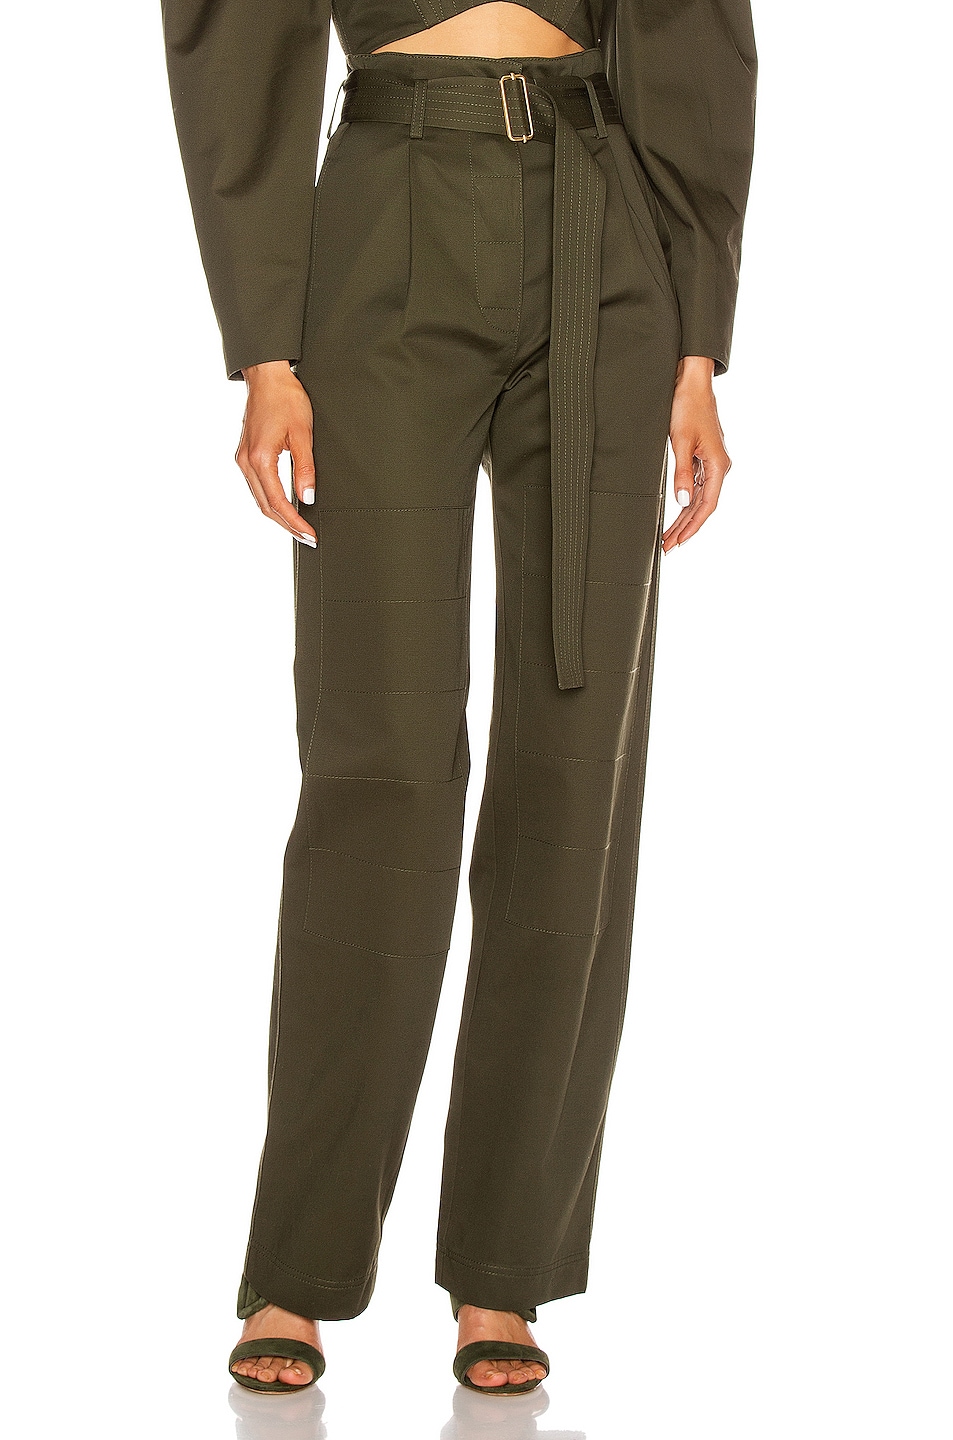 Dion Lee Utility Painter Pant in Olive | FWRD